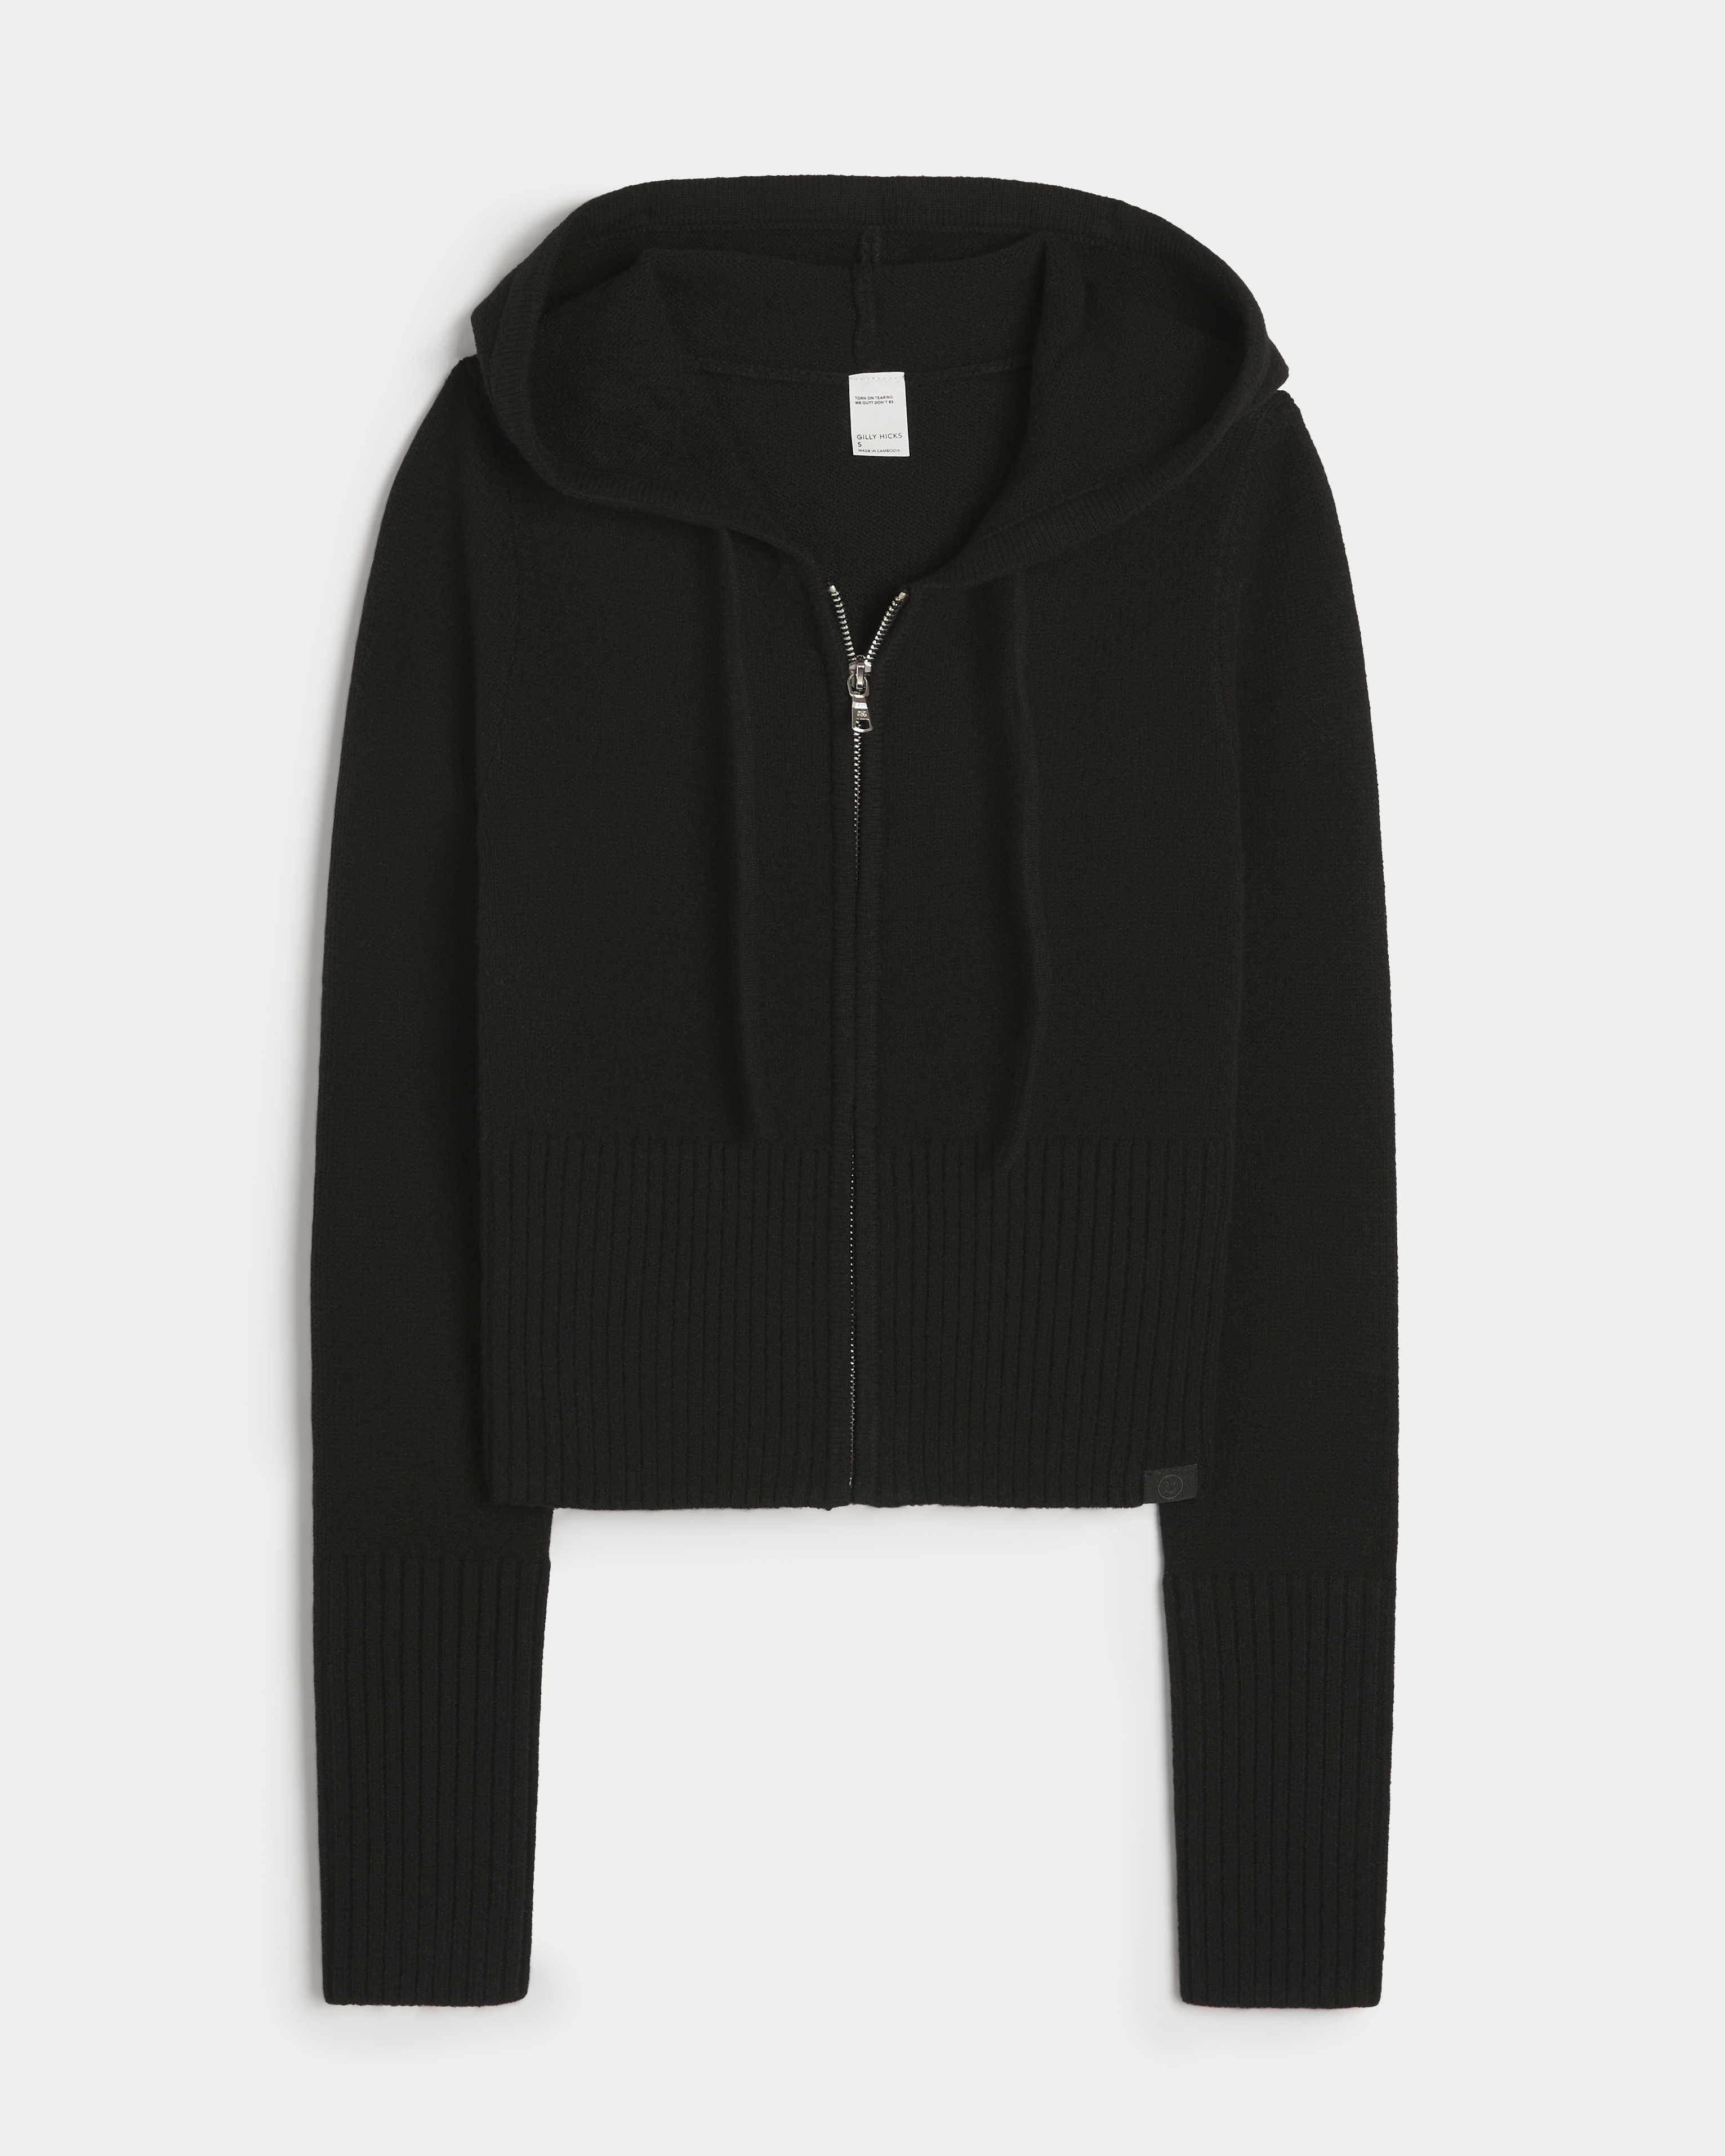 Gilly Hicks Sweater-Knit Zip-Up Hoodie